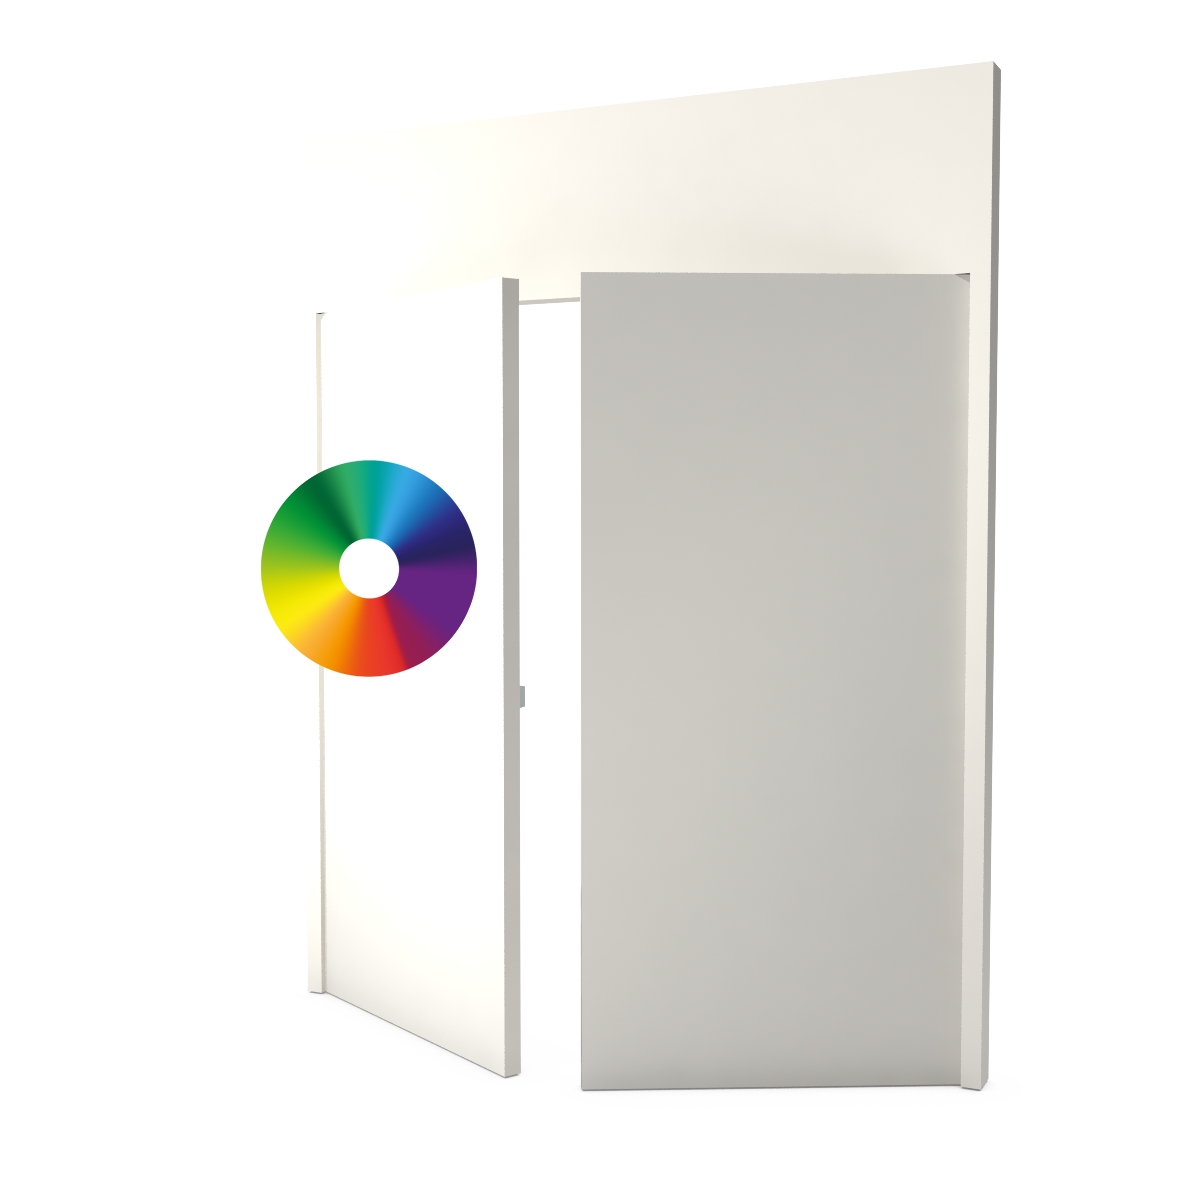 Double painted door - Choice of color